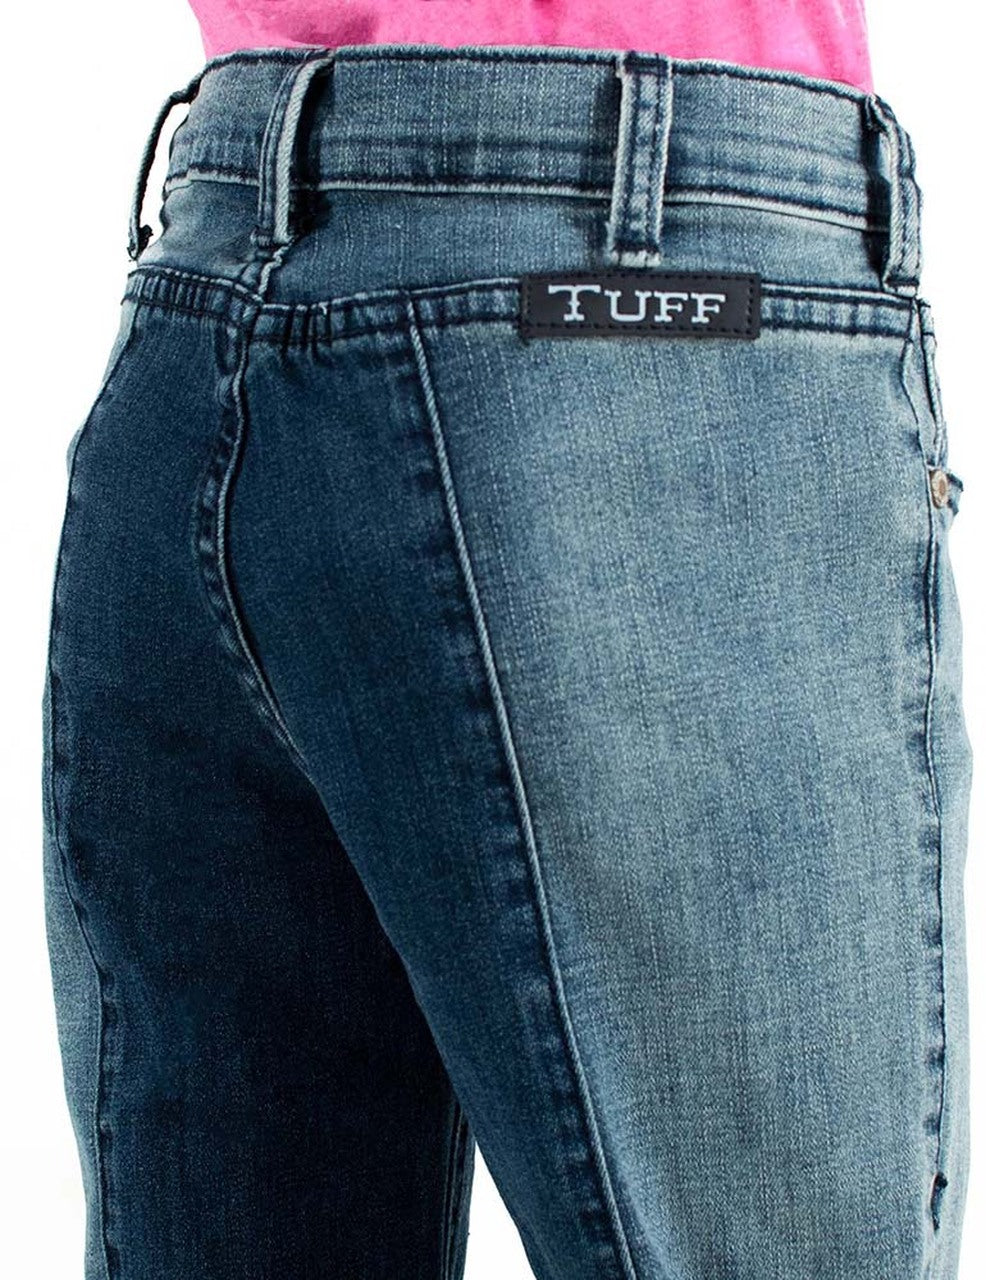 COWGIRL TUFF Girl's Day & Night Jeans